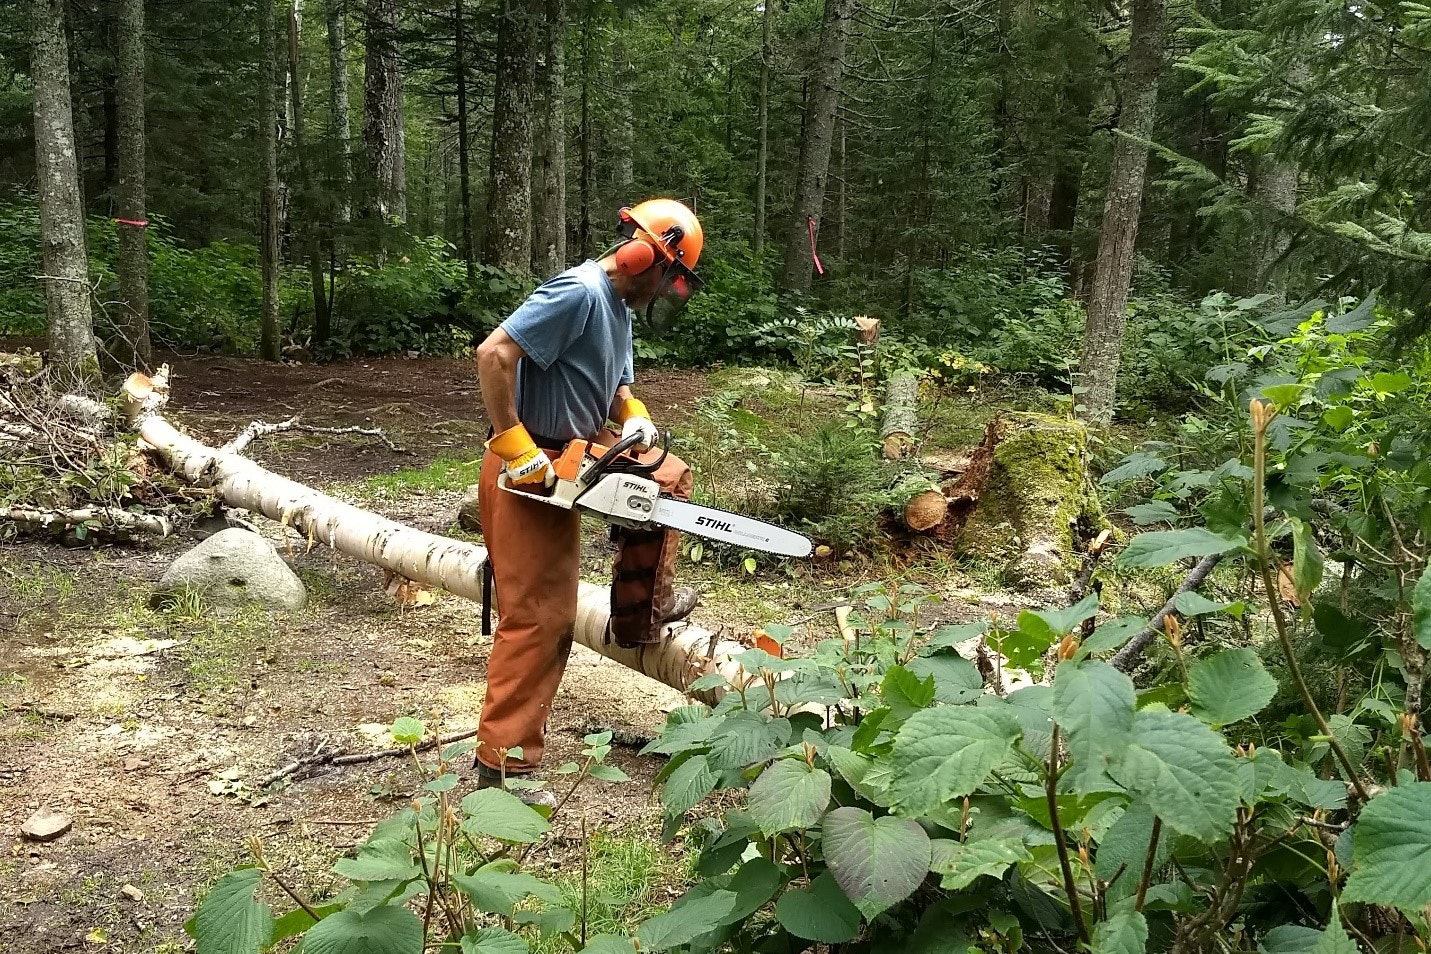 A person, wearing safety gear, uses a chain saw to take down a tree